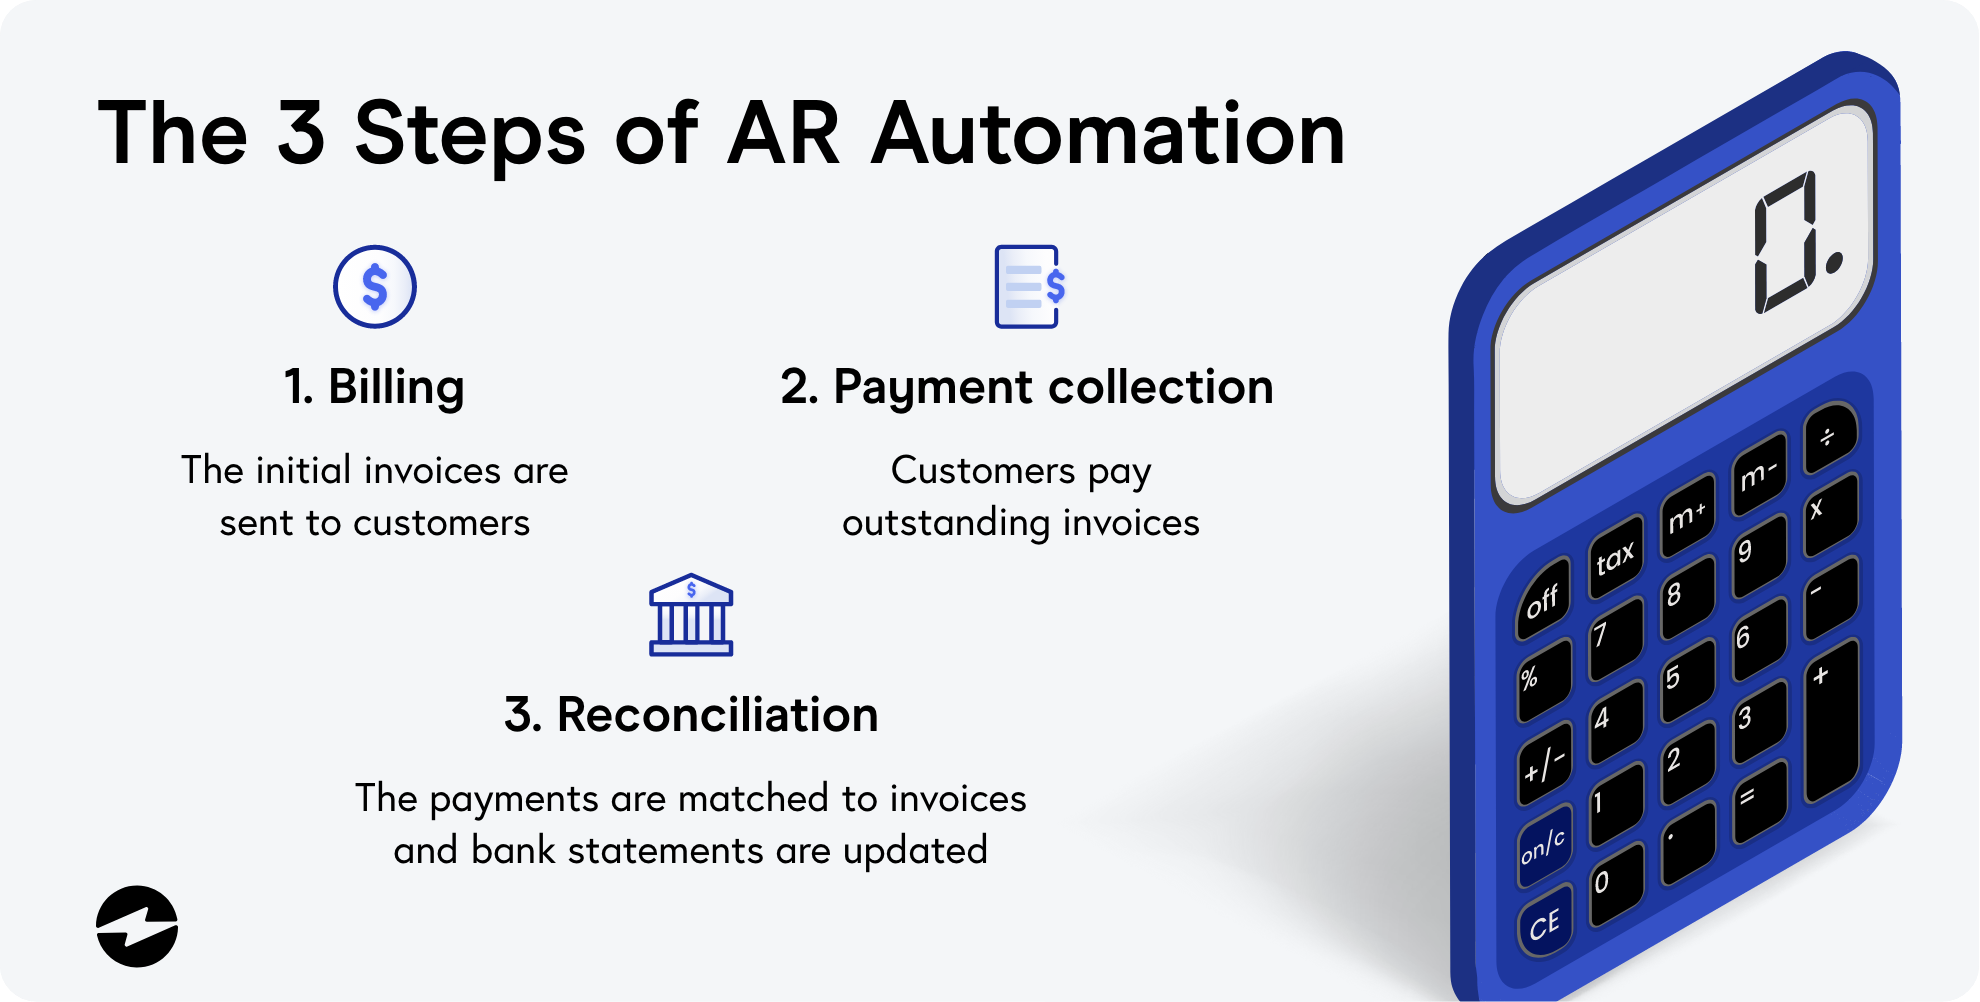 Steps of AR Automation